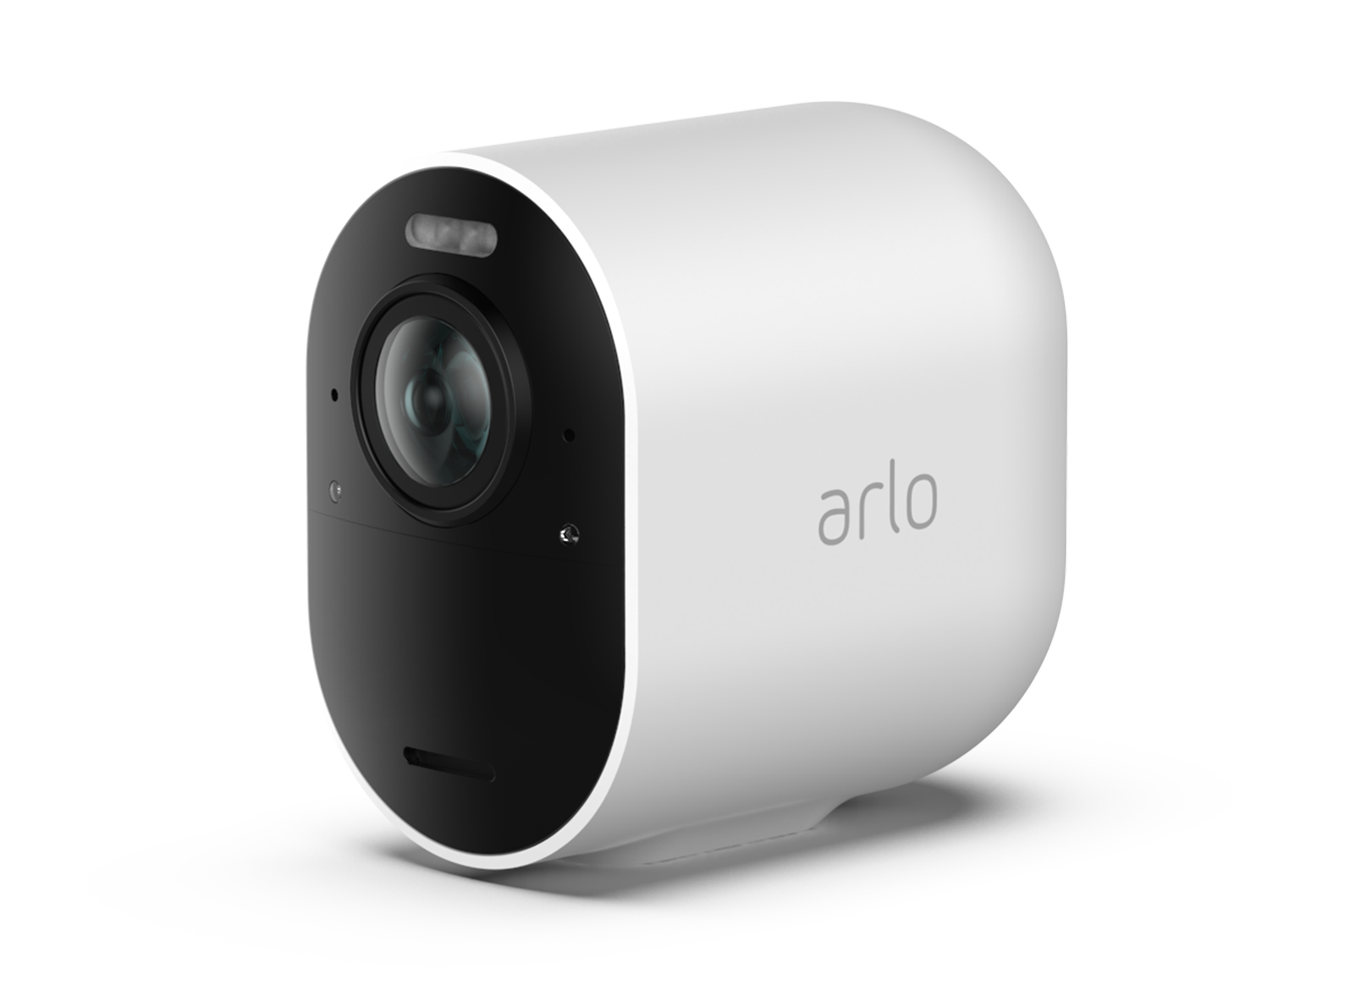 Best home security cameras of 2021 - Arlo Ultra